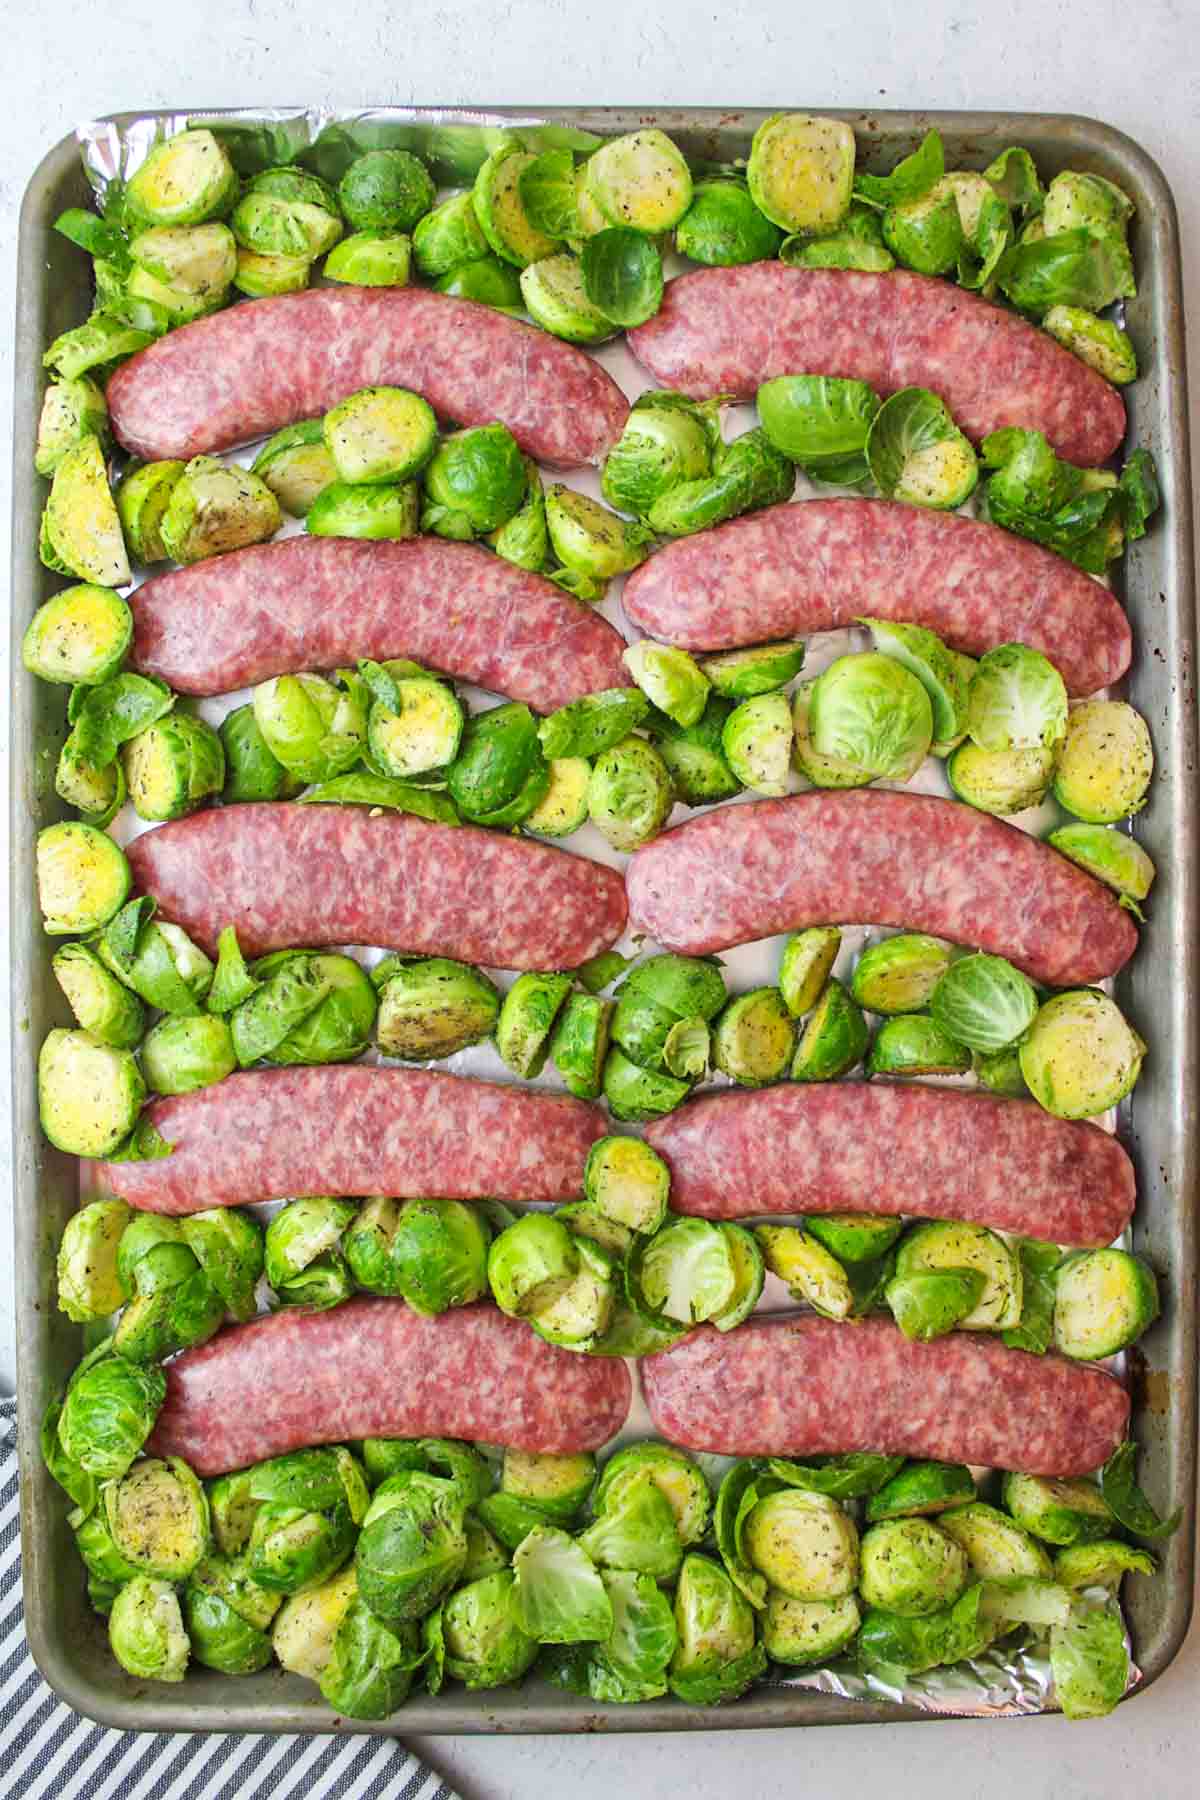 raw sausages on a baking sheet with halved brussel sprouts around them